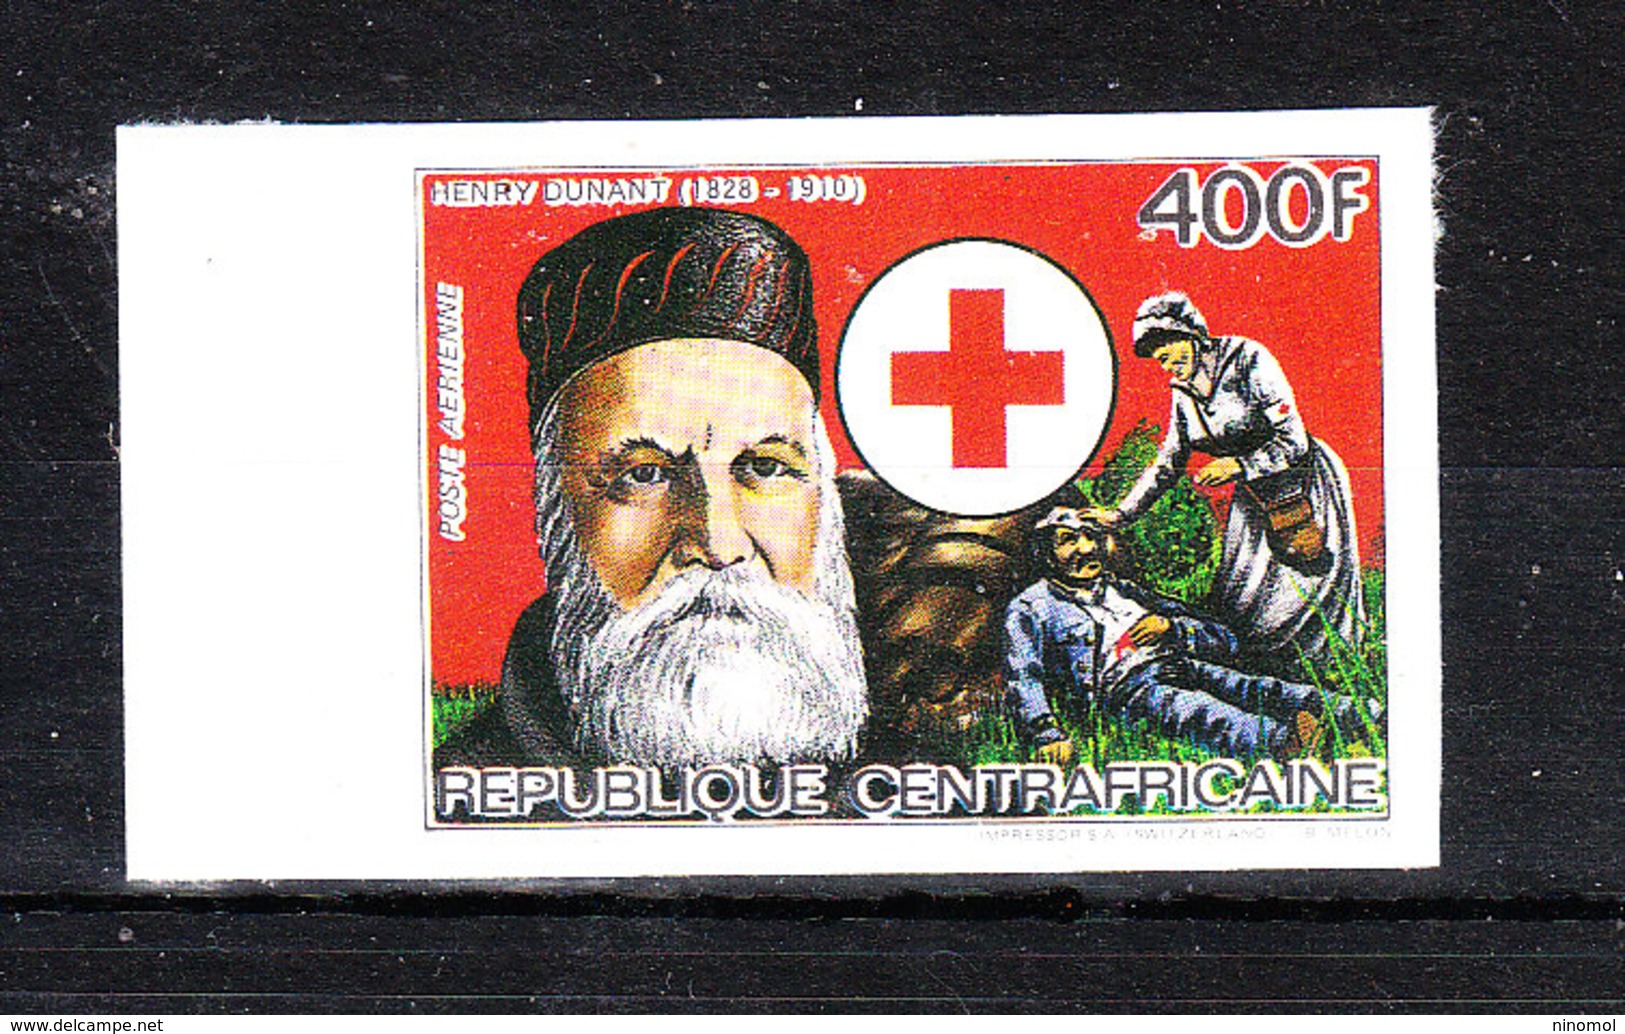 Centrafricaine  - 1984. Dunant, Soccorso Medico Croce Rossa. Red Cross, Medical Rescue. MNH Imperf. RARE - Croce Rossa